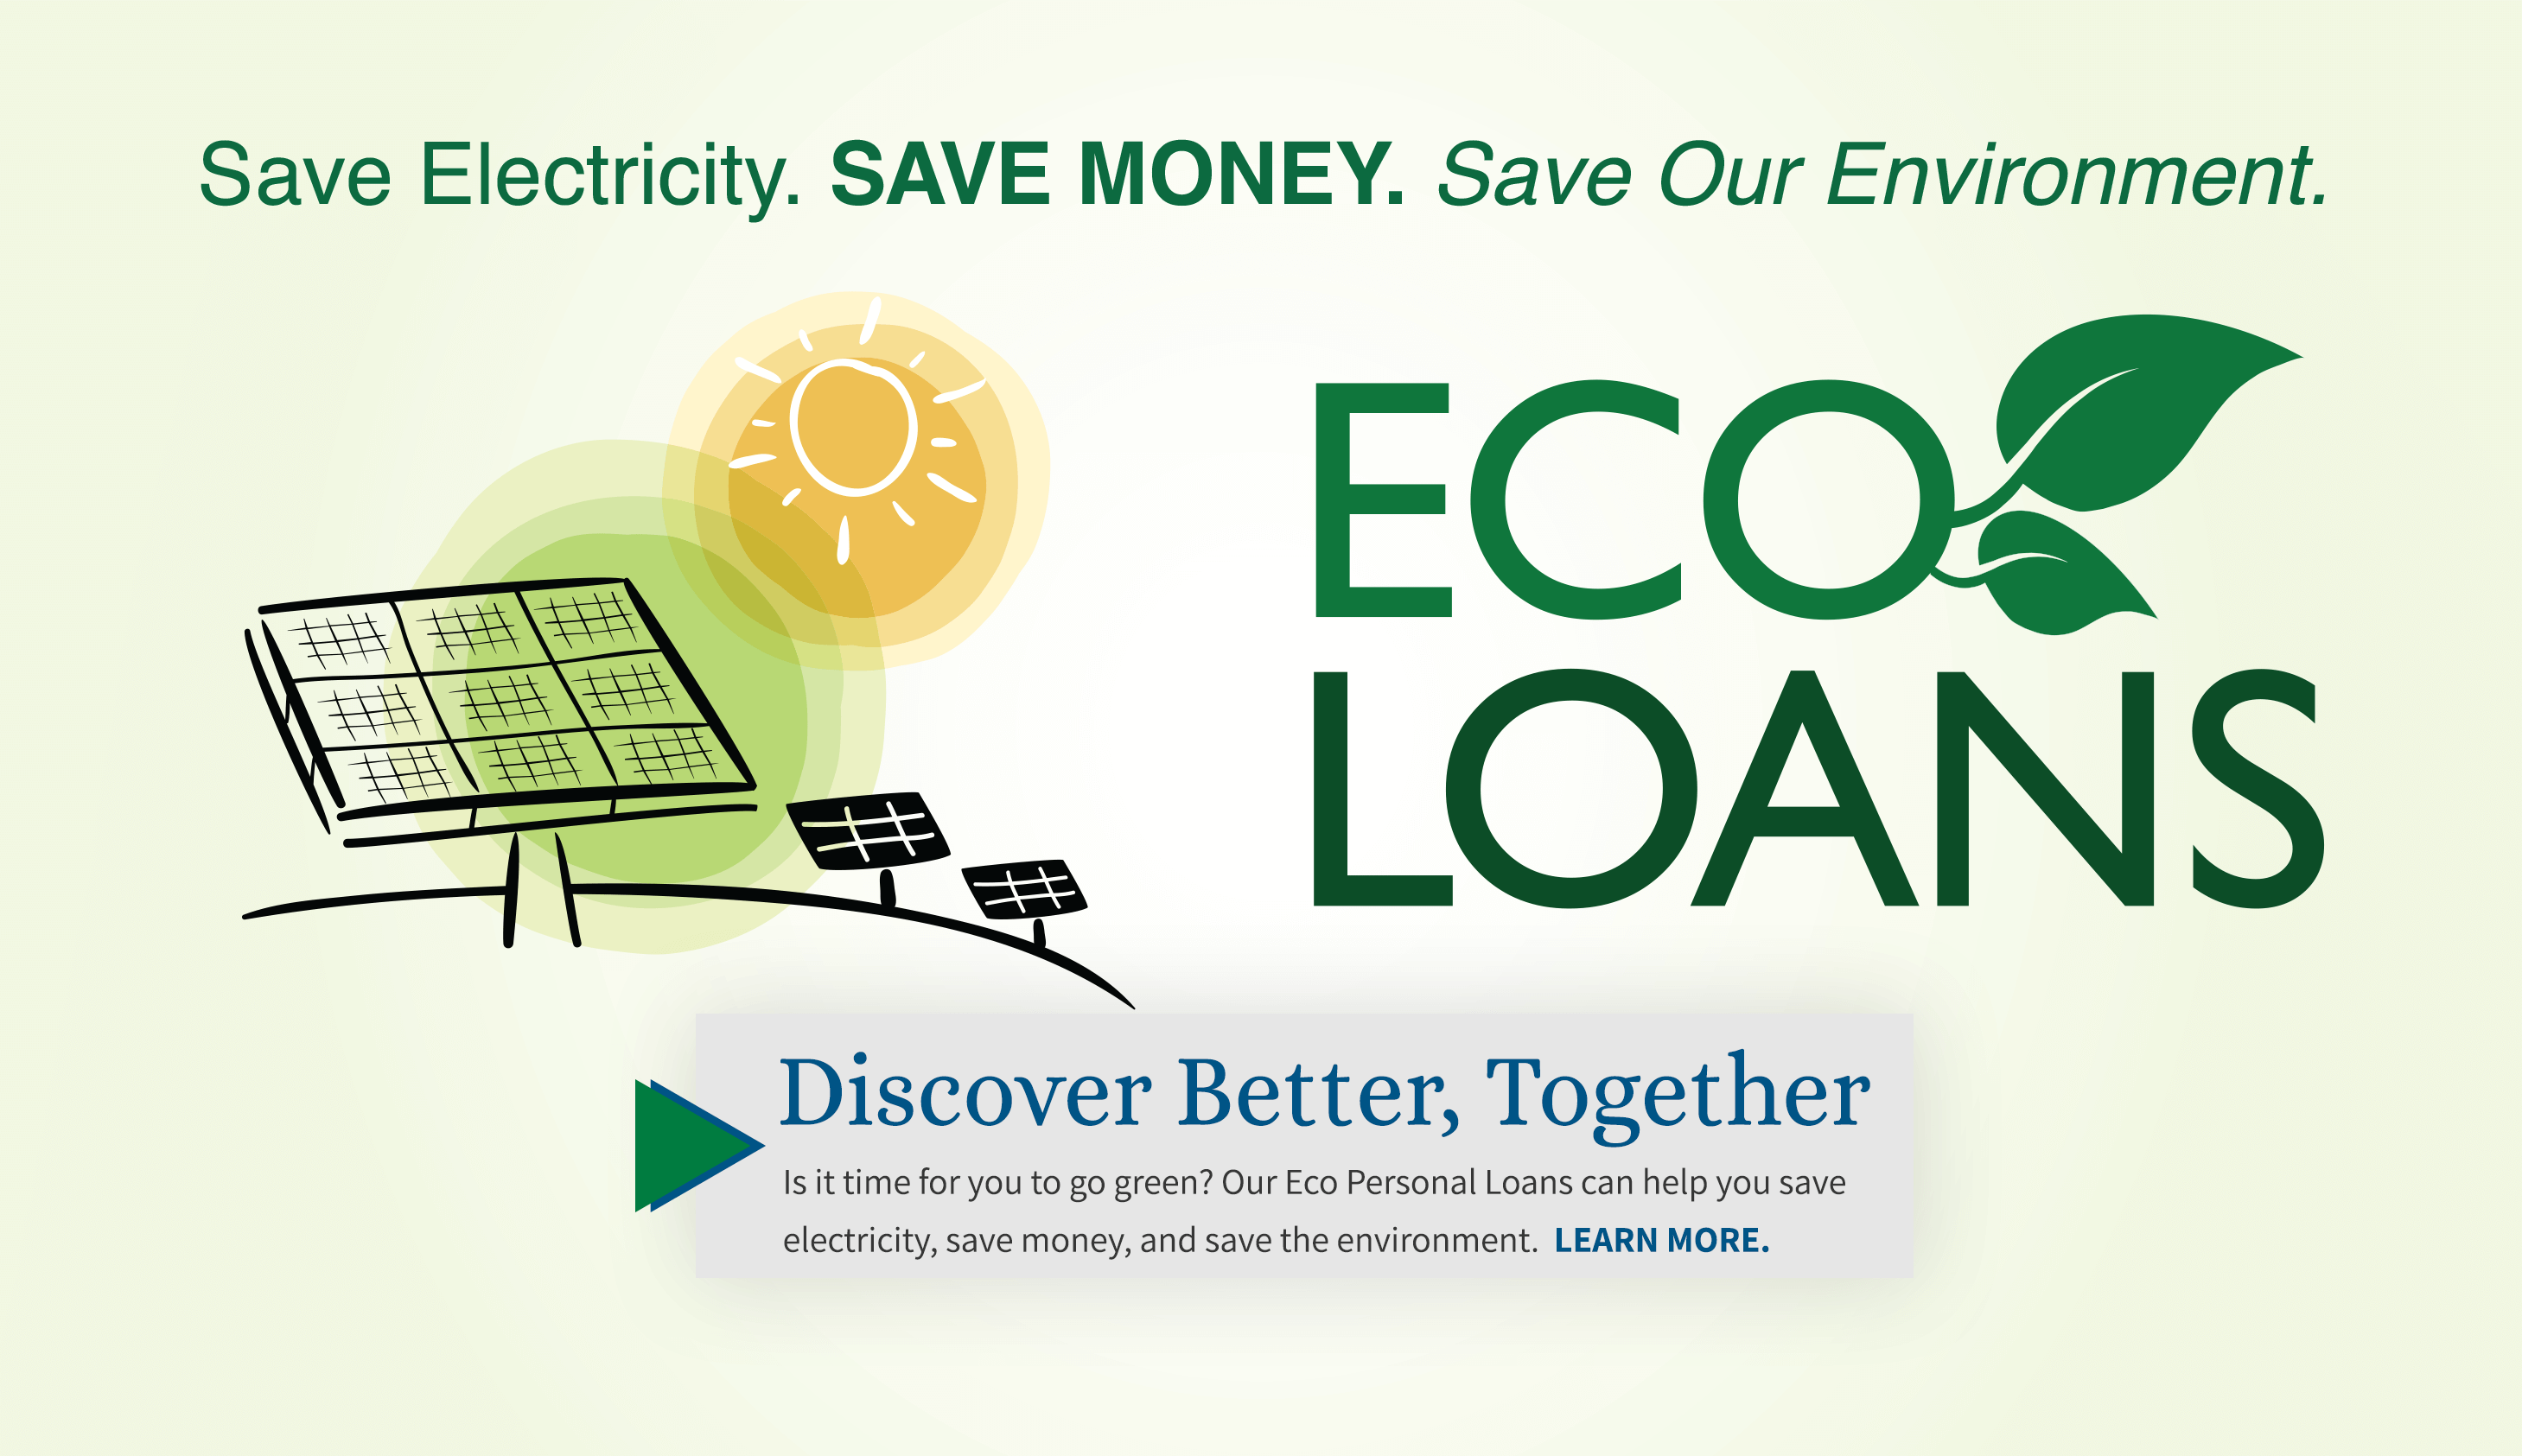 Save electricity. Save money, Save the environment. Eco loans. Discover better together. Is it time for you to go green? Our eco personal loans can help you save electricity, save money, and save the environment. Learn more.